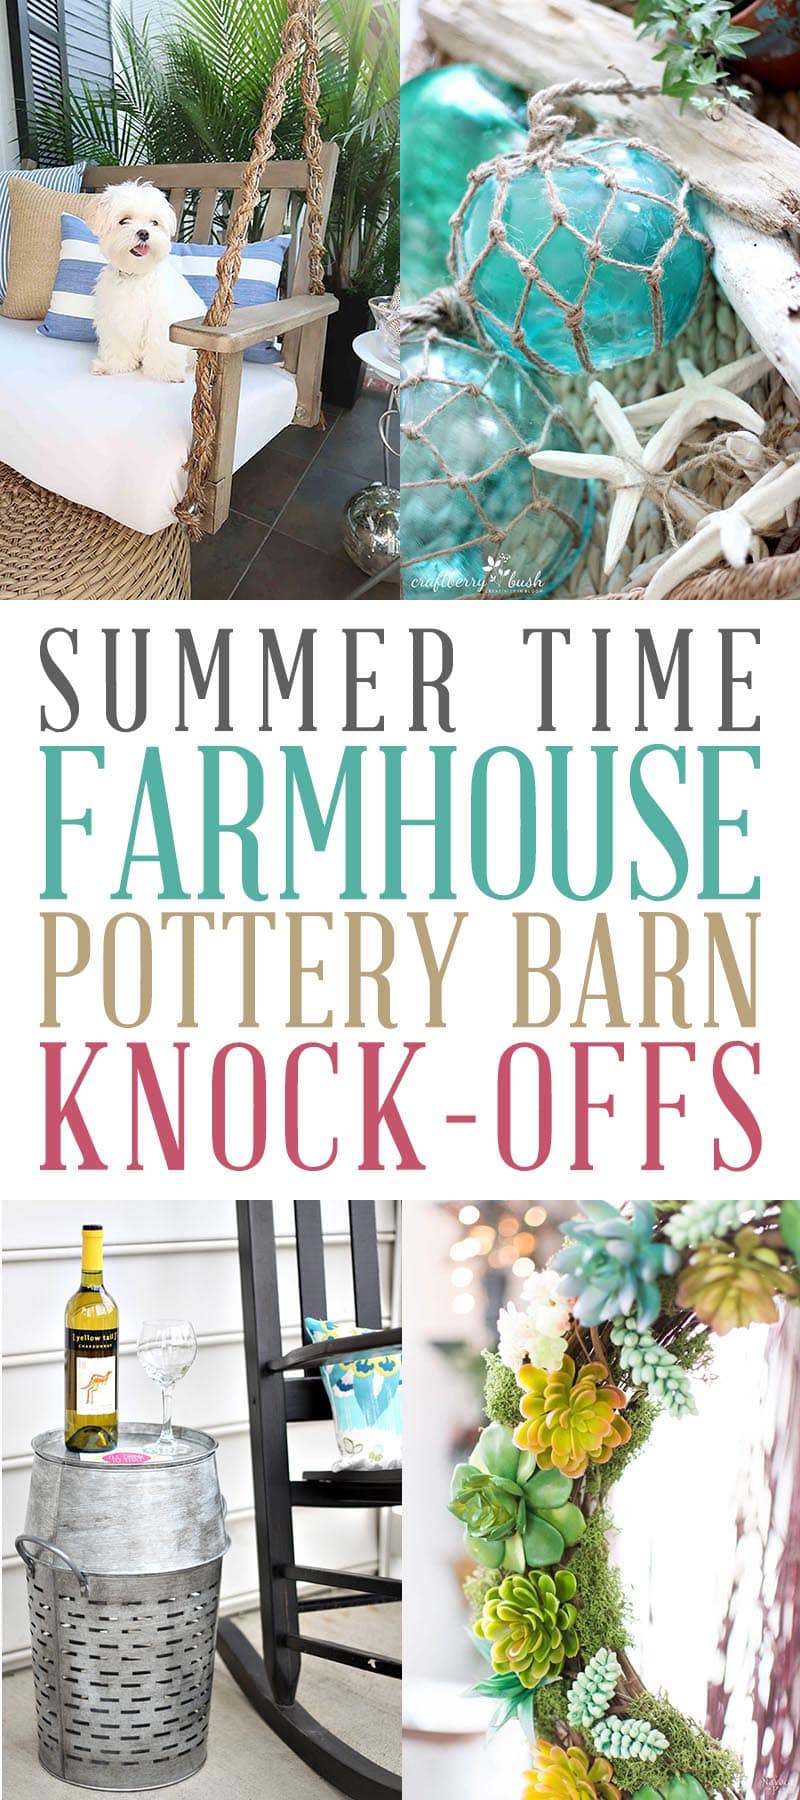 These Summer Farmhouse Pottery Barn Knock-Offs are sure to bring a gentle breeze of Summer Time freshness to your Home Decor